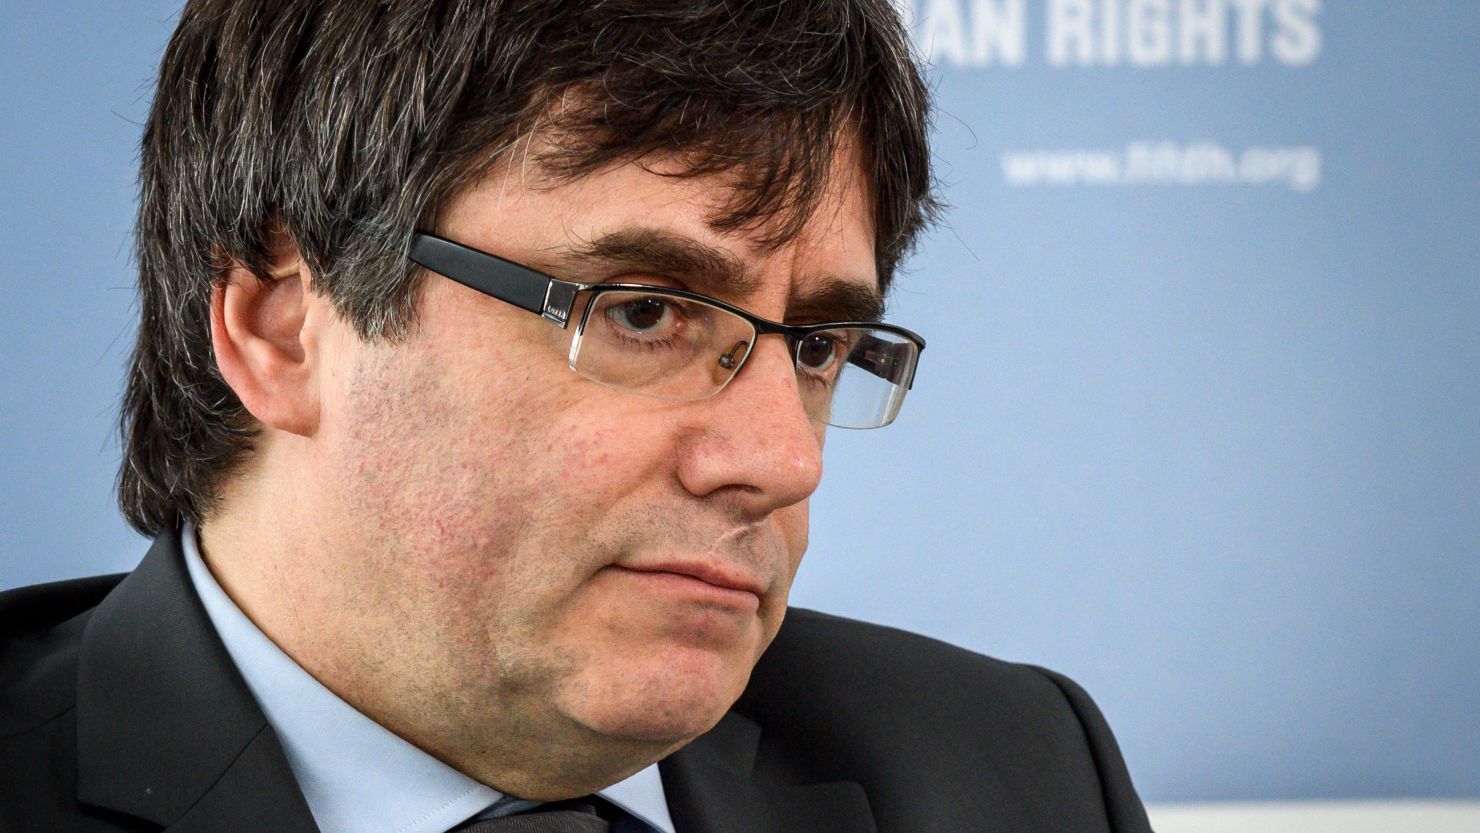 Carles Puigdemont was living in self-imposed exile in Belgium following the failed independence bid until his arrest in Germany in March.